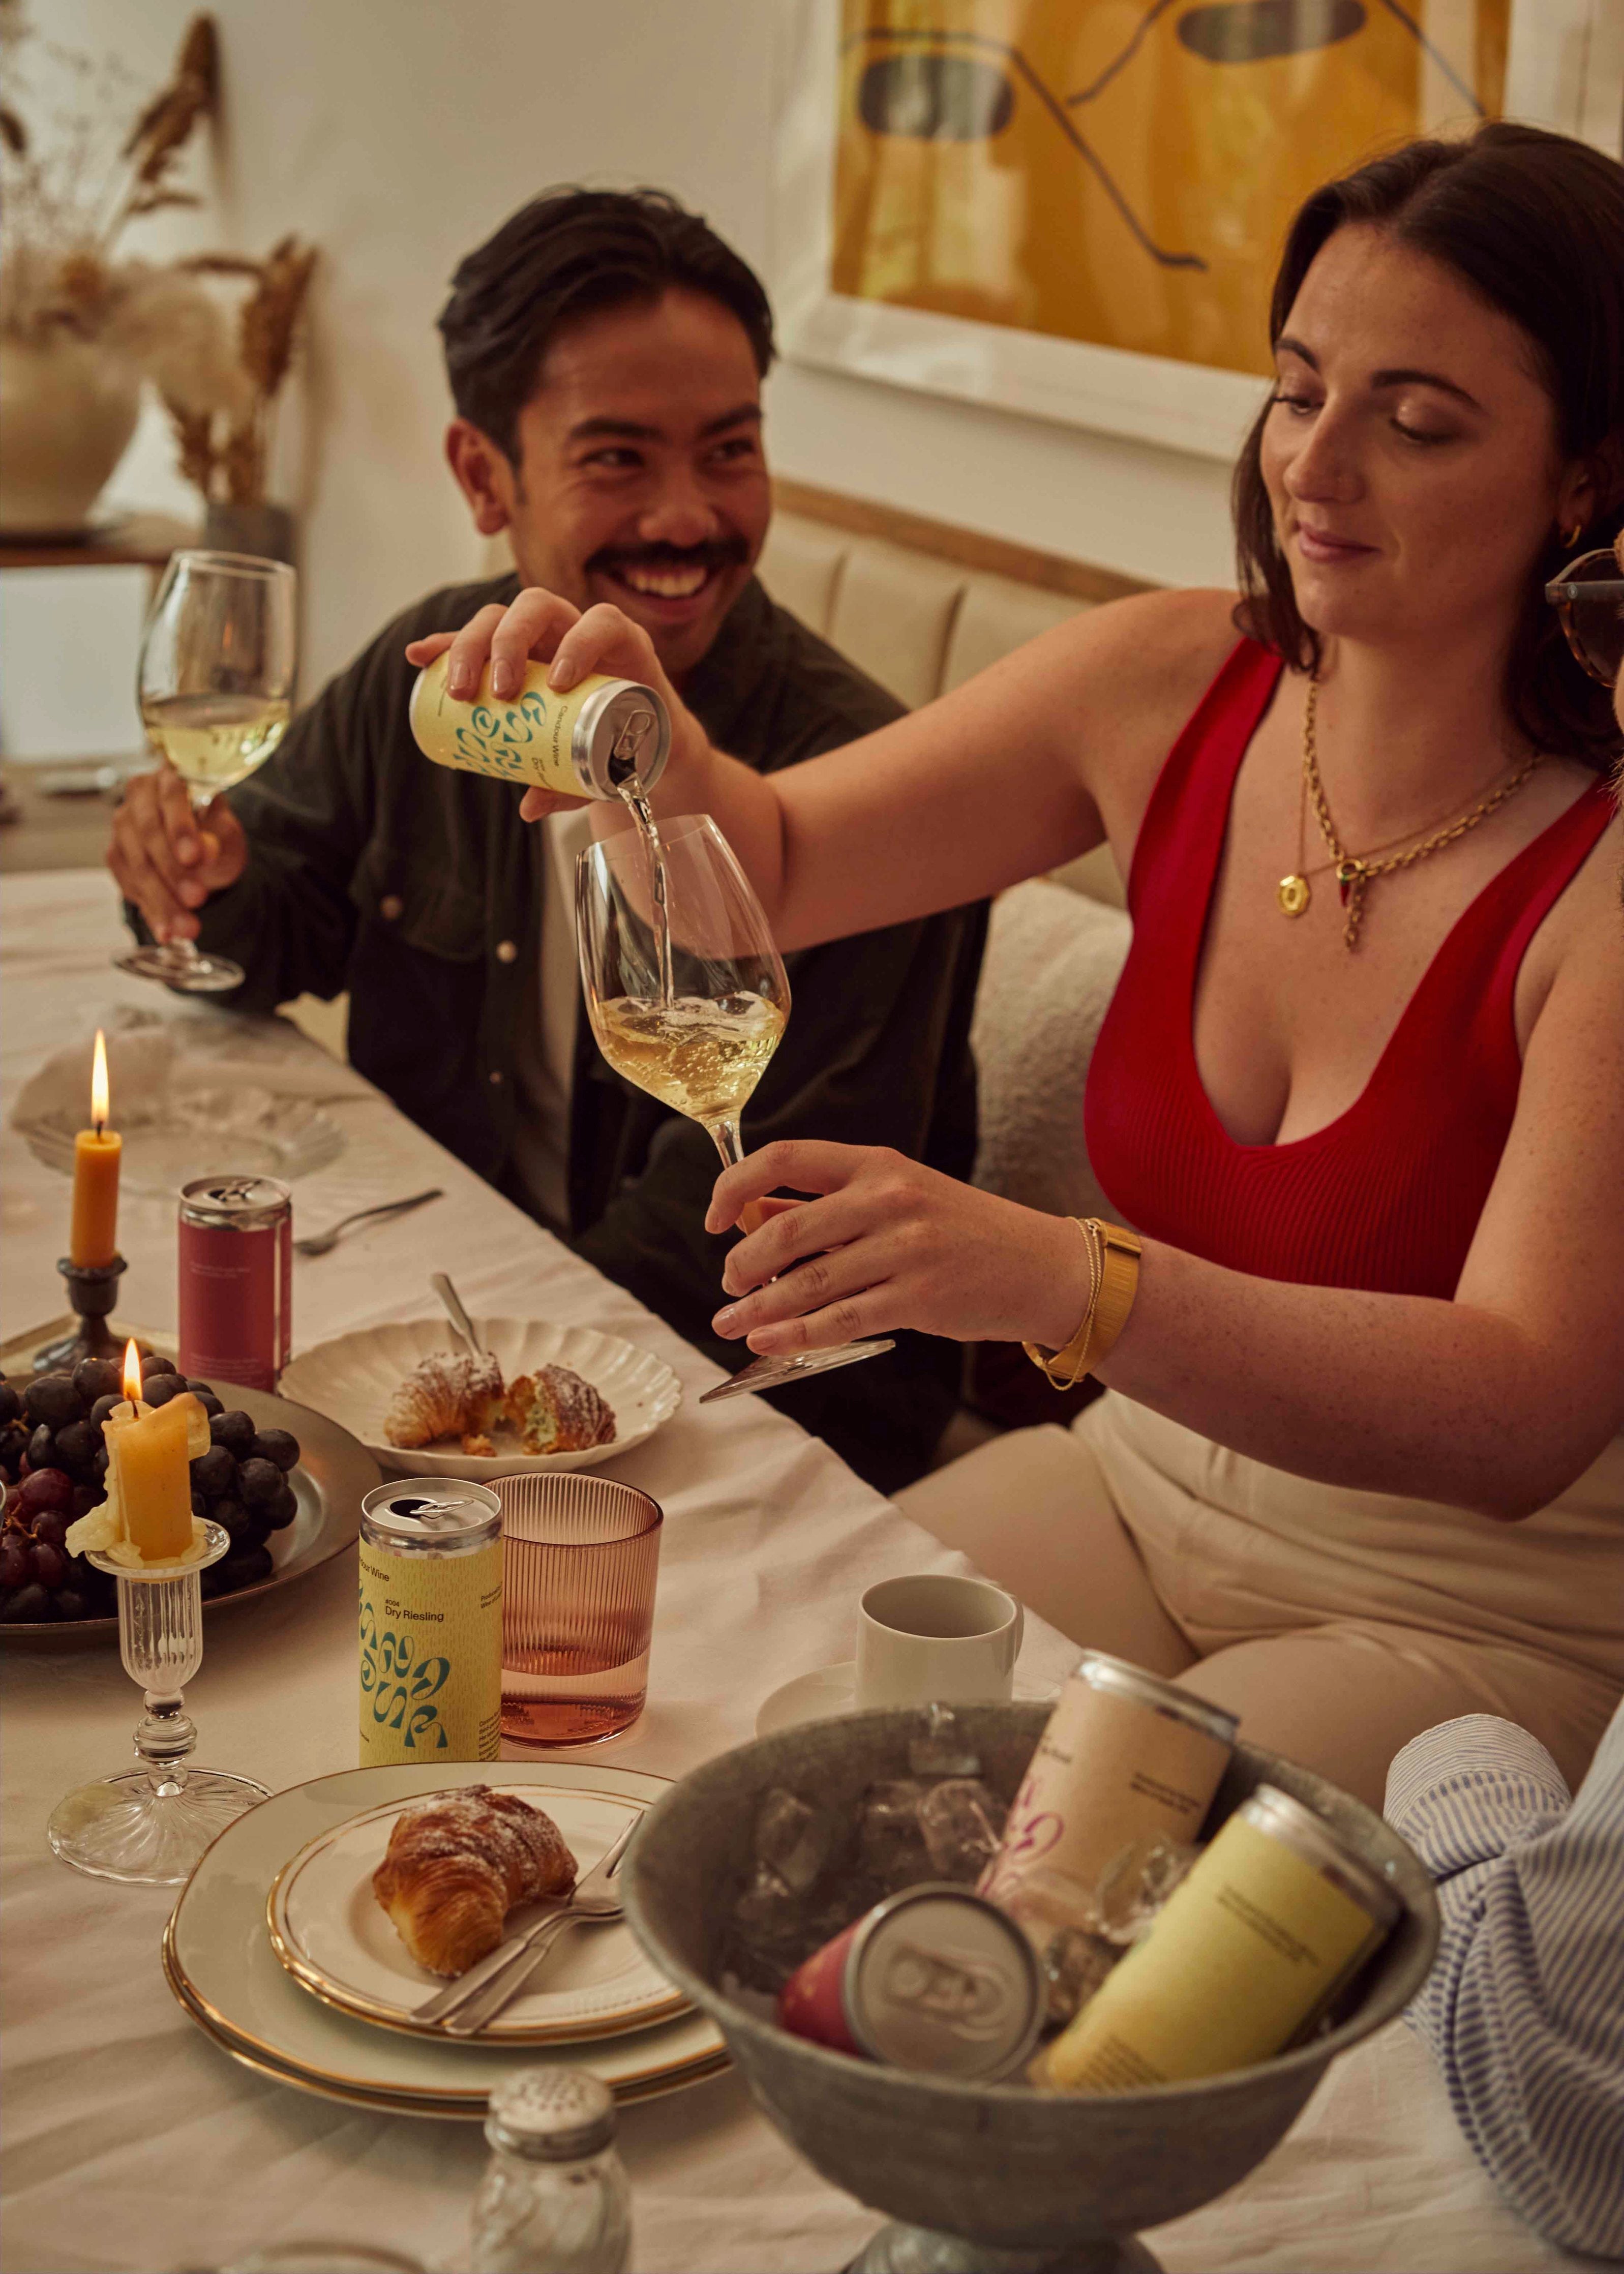 Woman seated at a table pouring white wine into a glass while her friend holds another glass and laughs. The remains of a nice dinner are on the table.